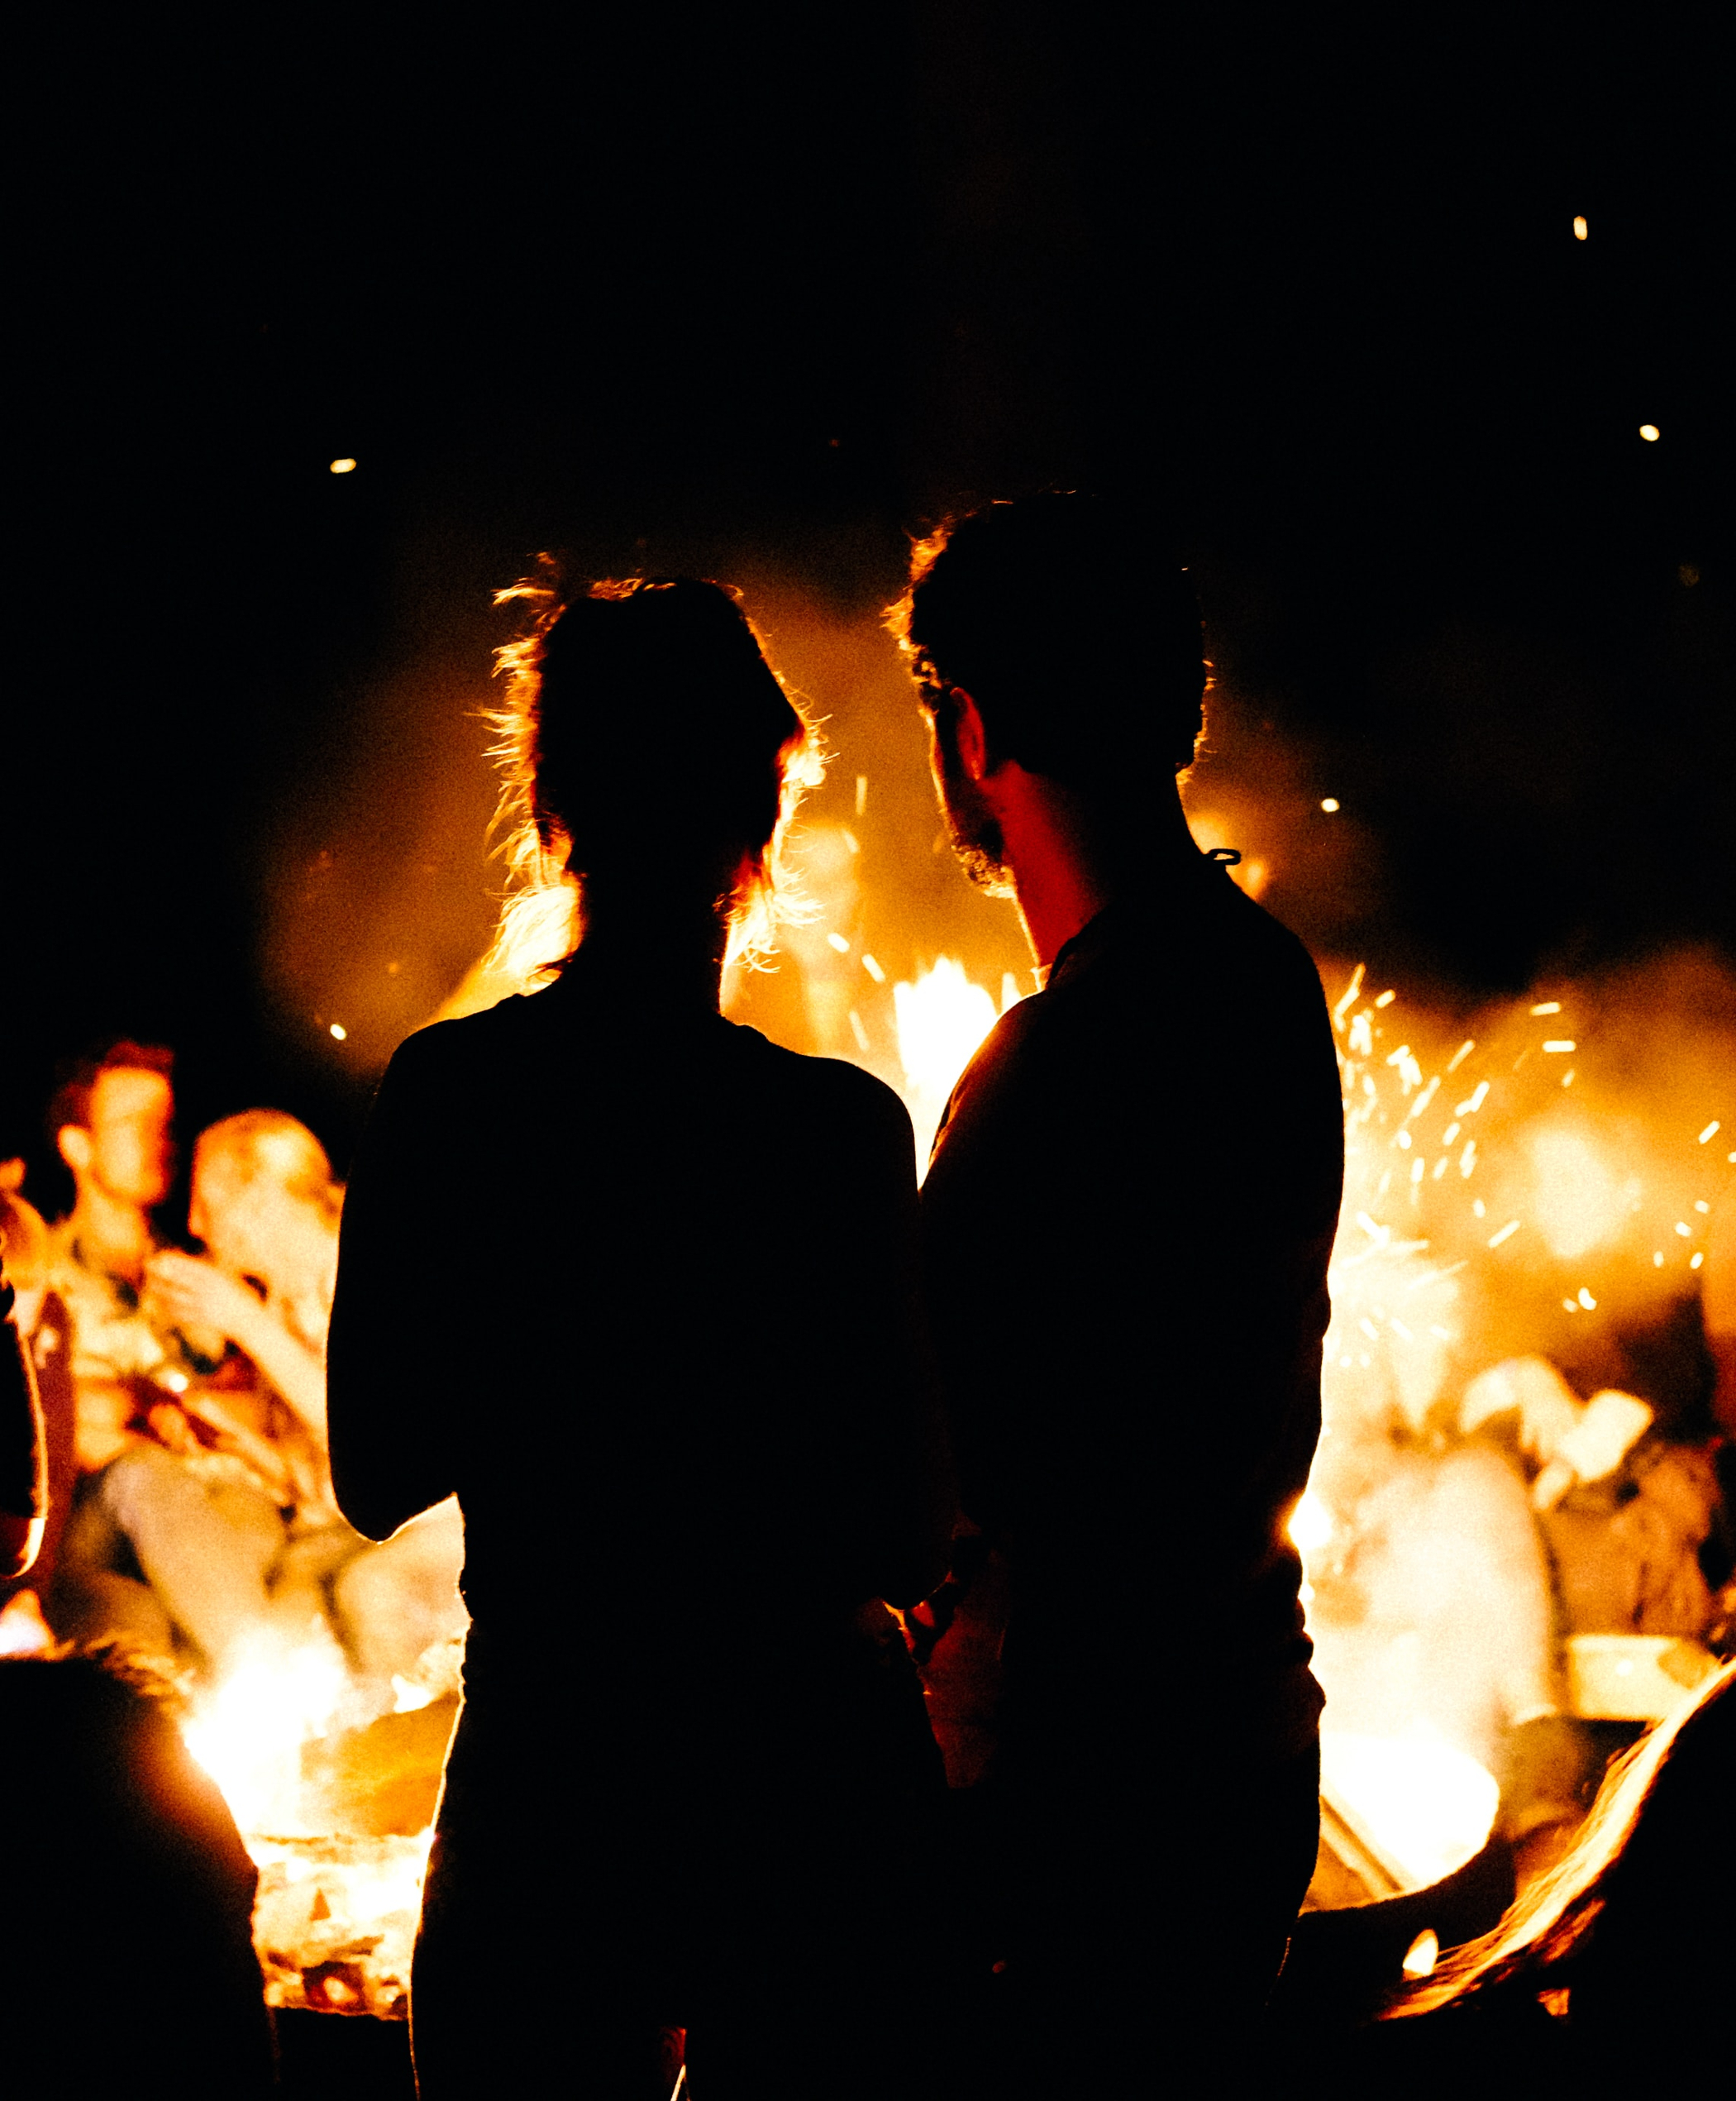 Two people standing in front of a fire. | Source: Unsplash